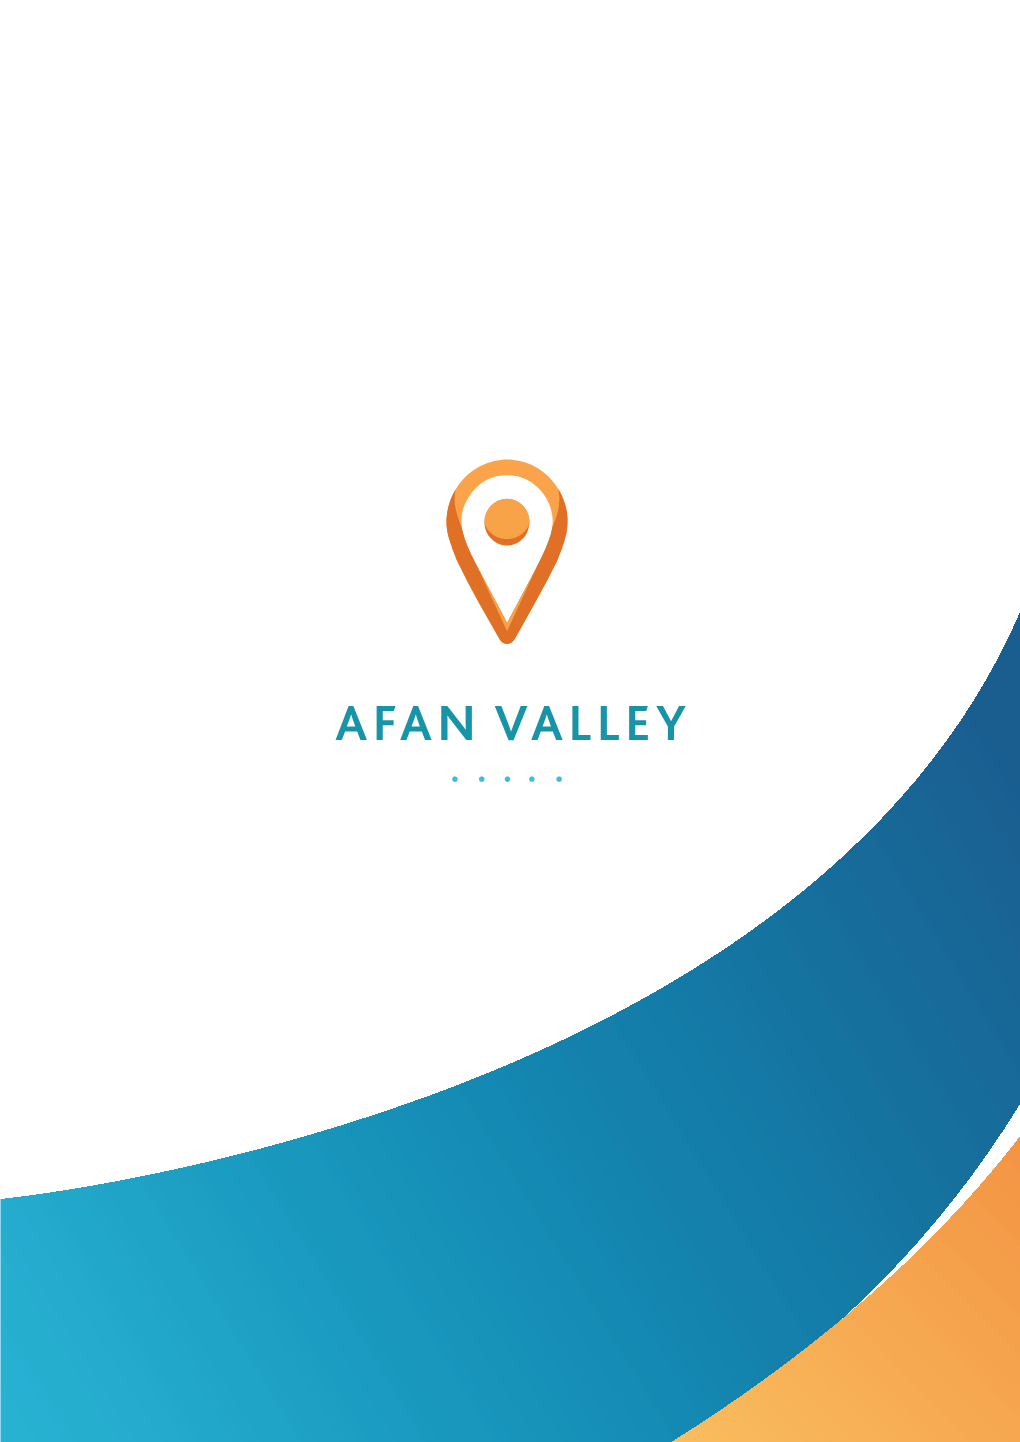 Afan Valley Introduction